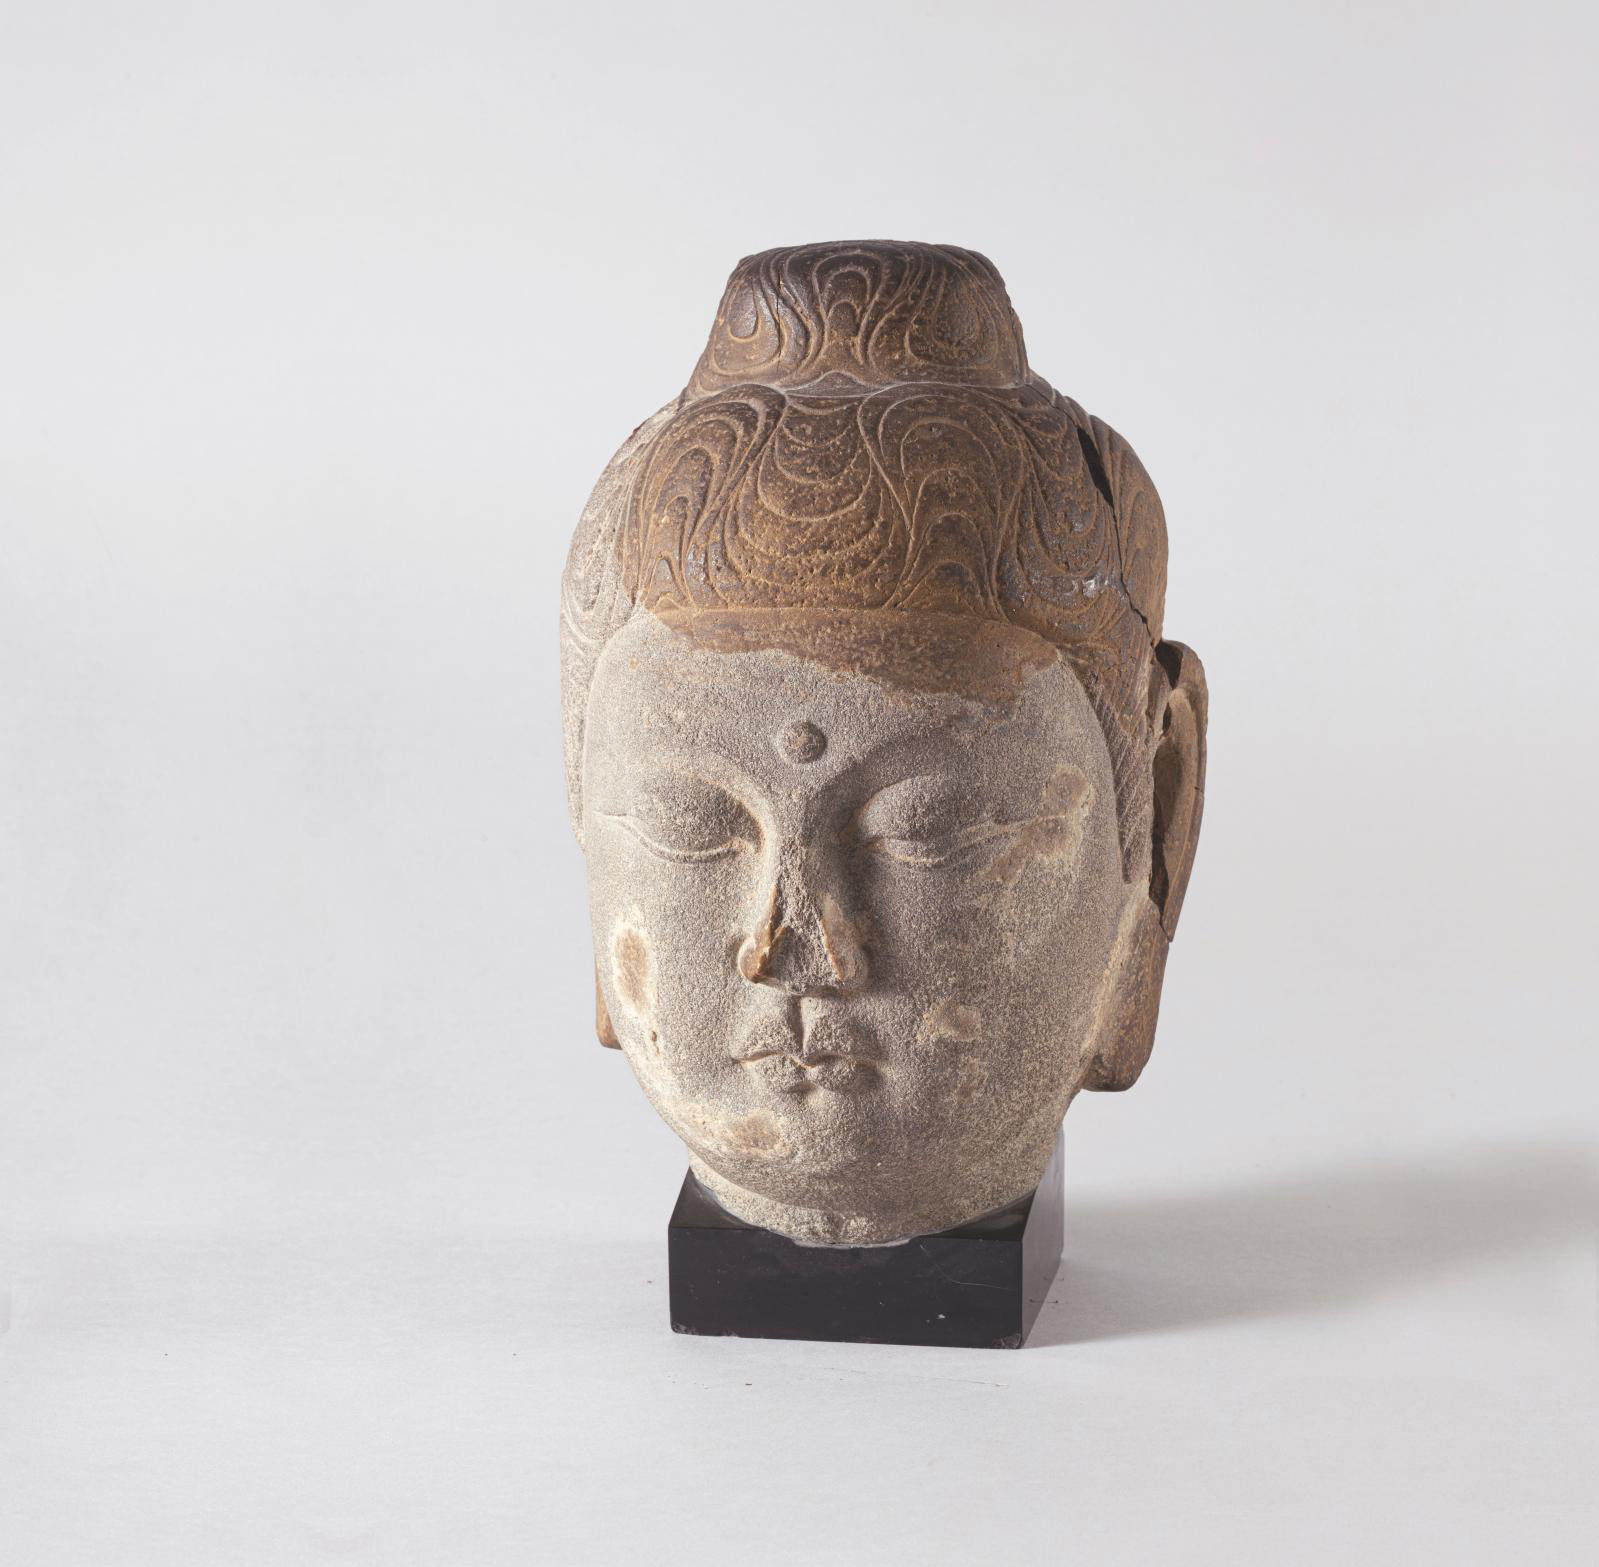 The Serenity of a Rare Buddha from the Tang Period